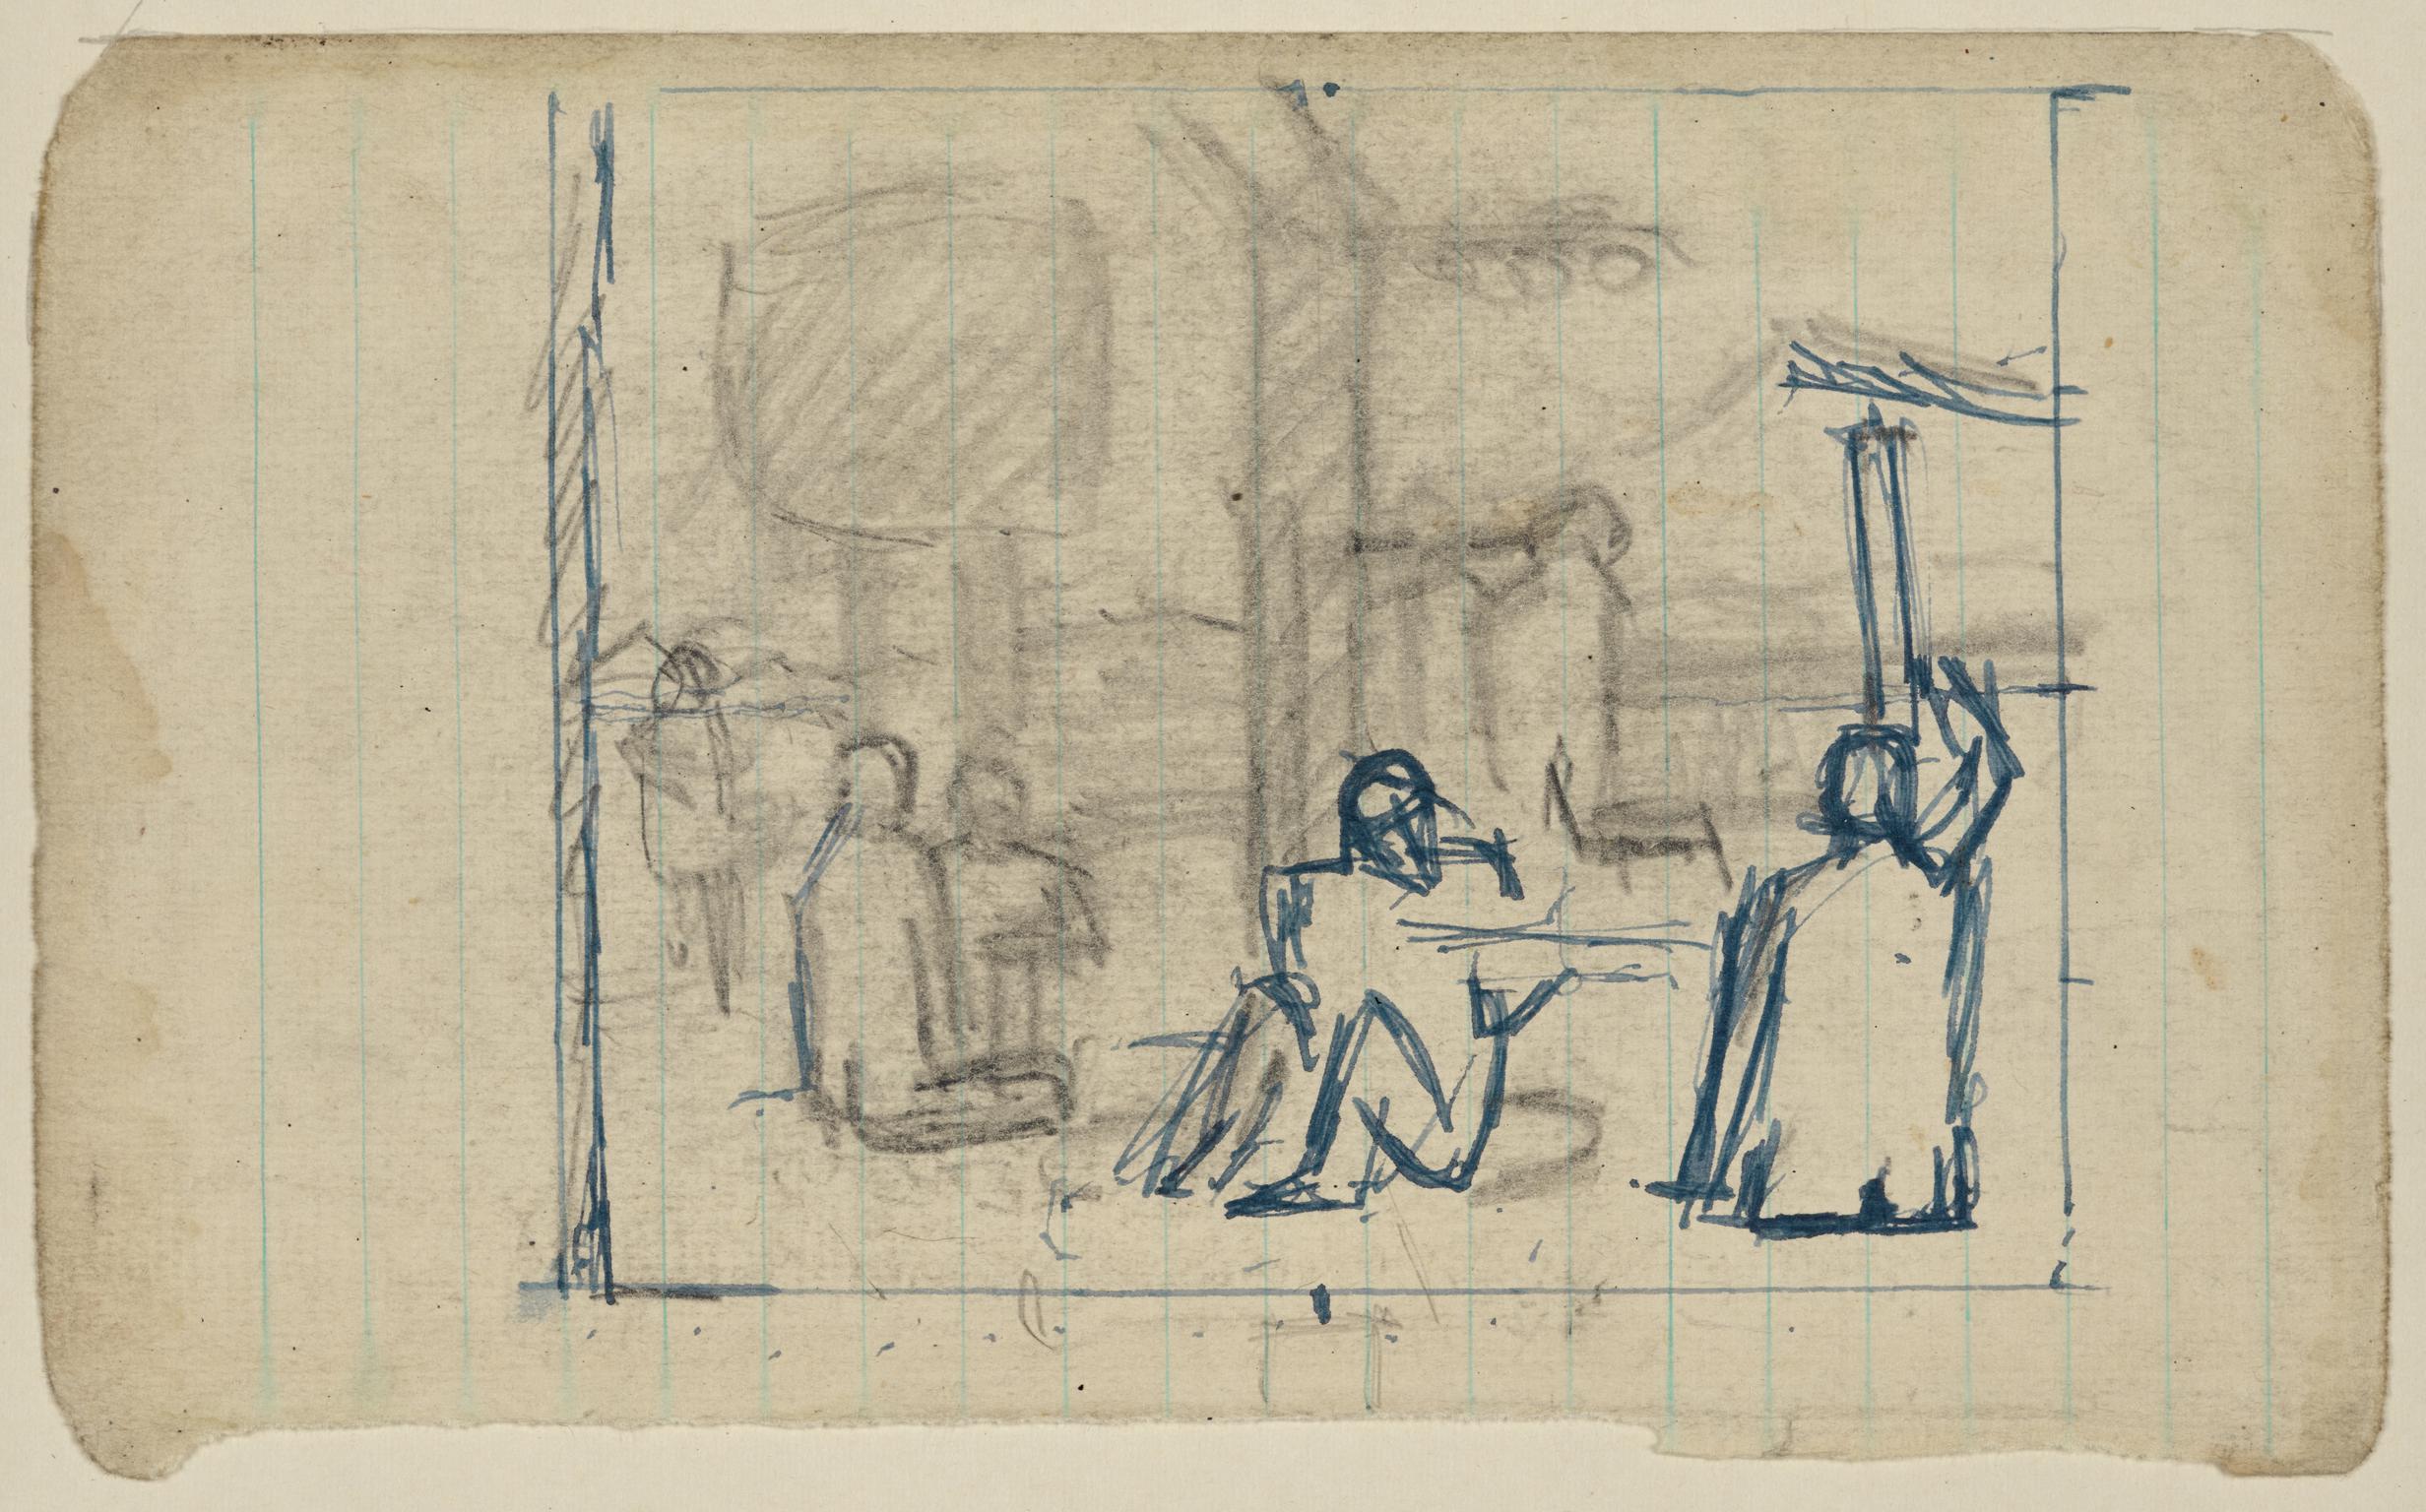 Composition study for "The Musicians"